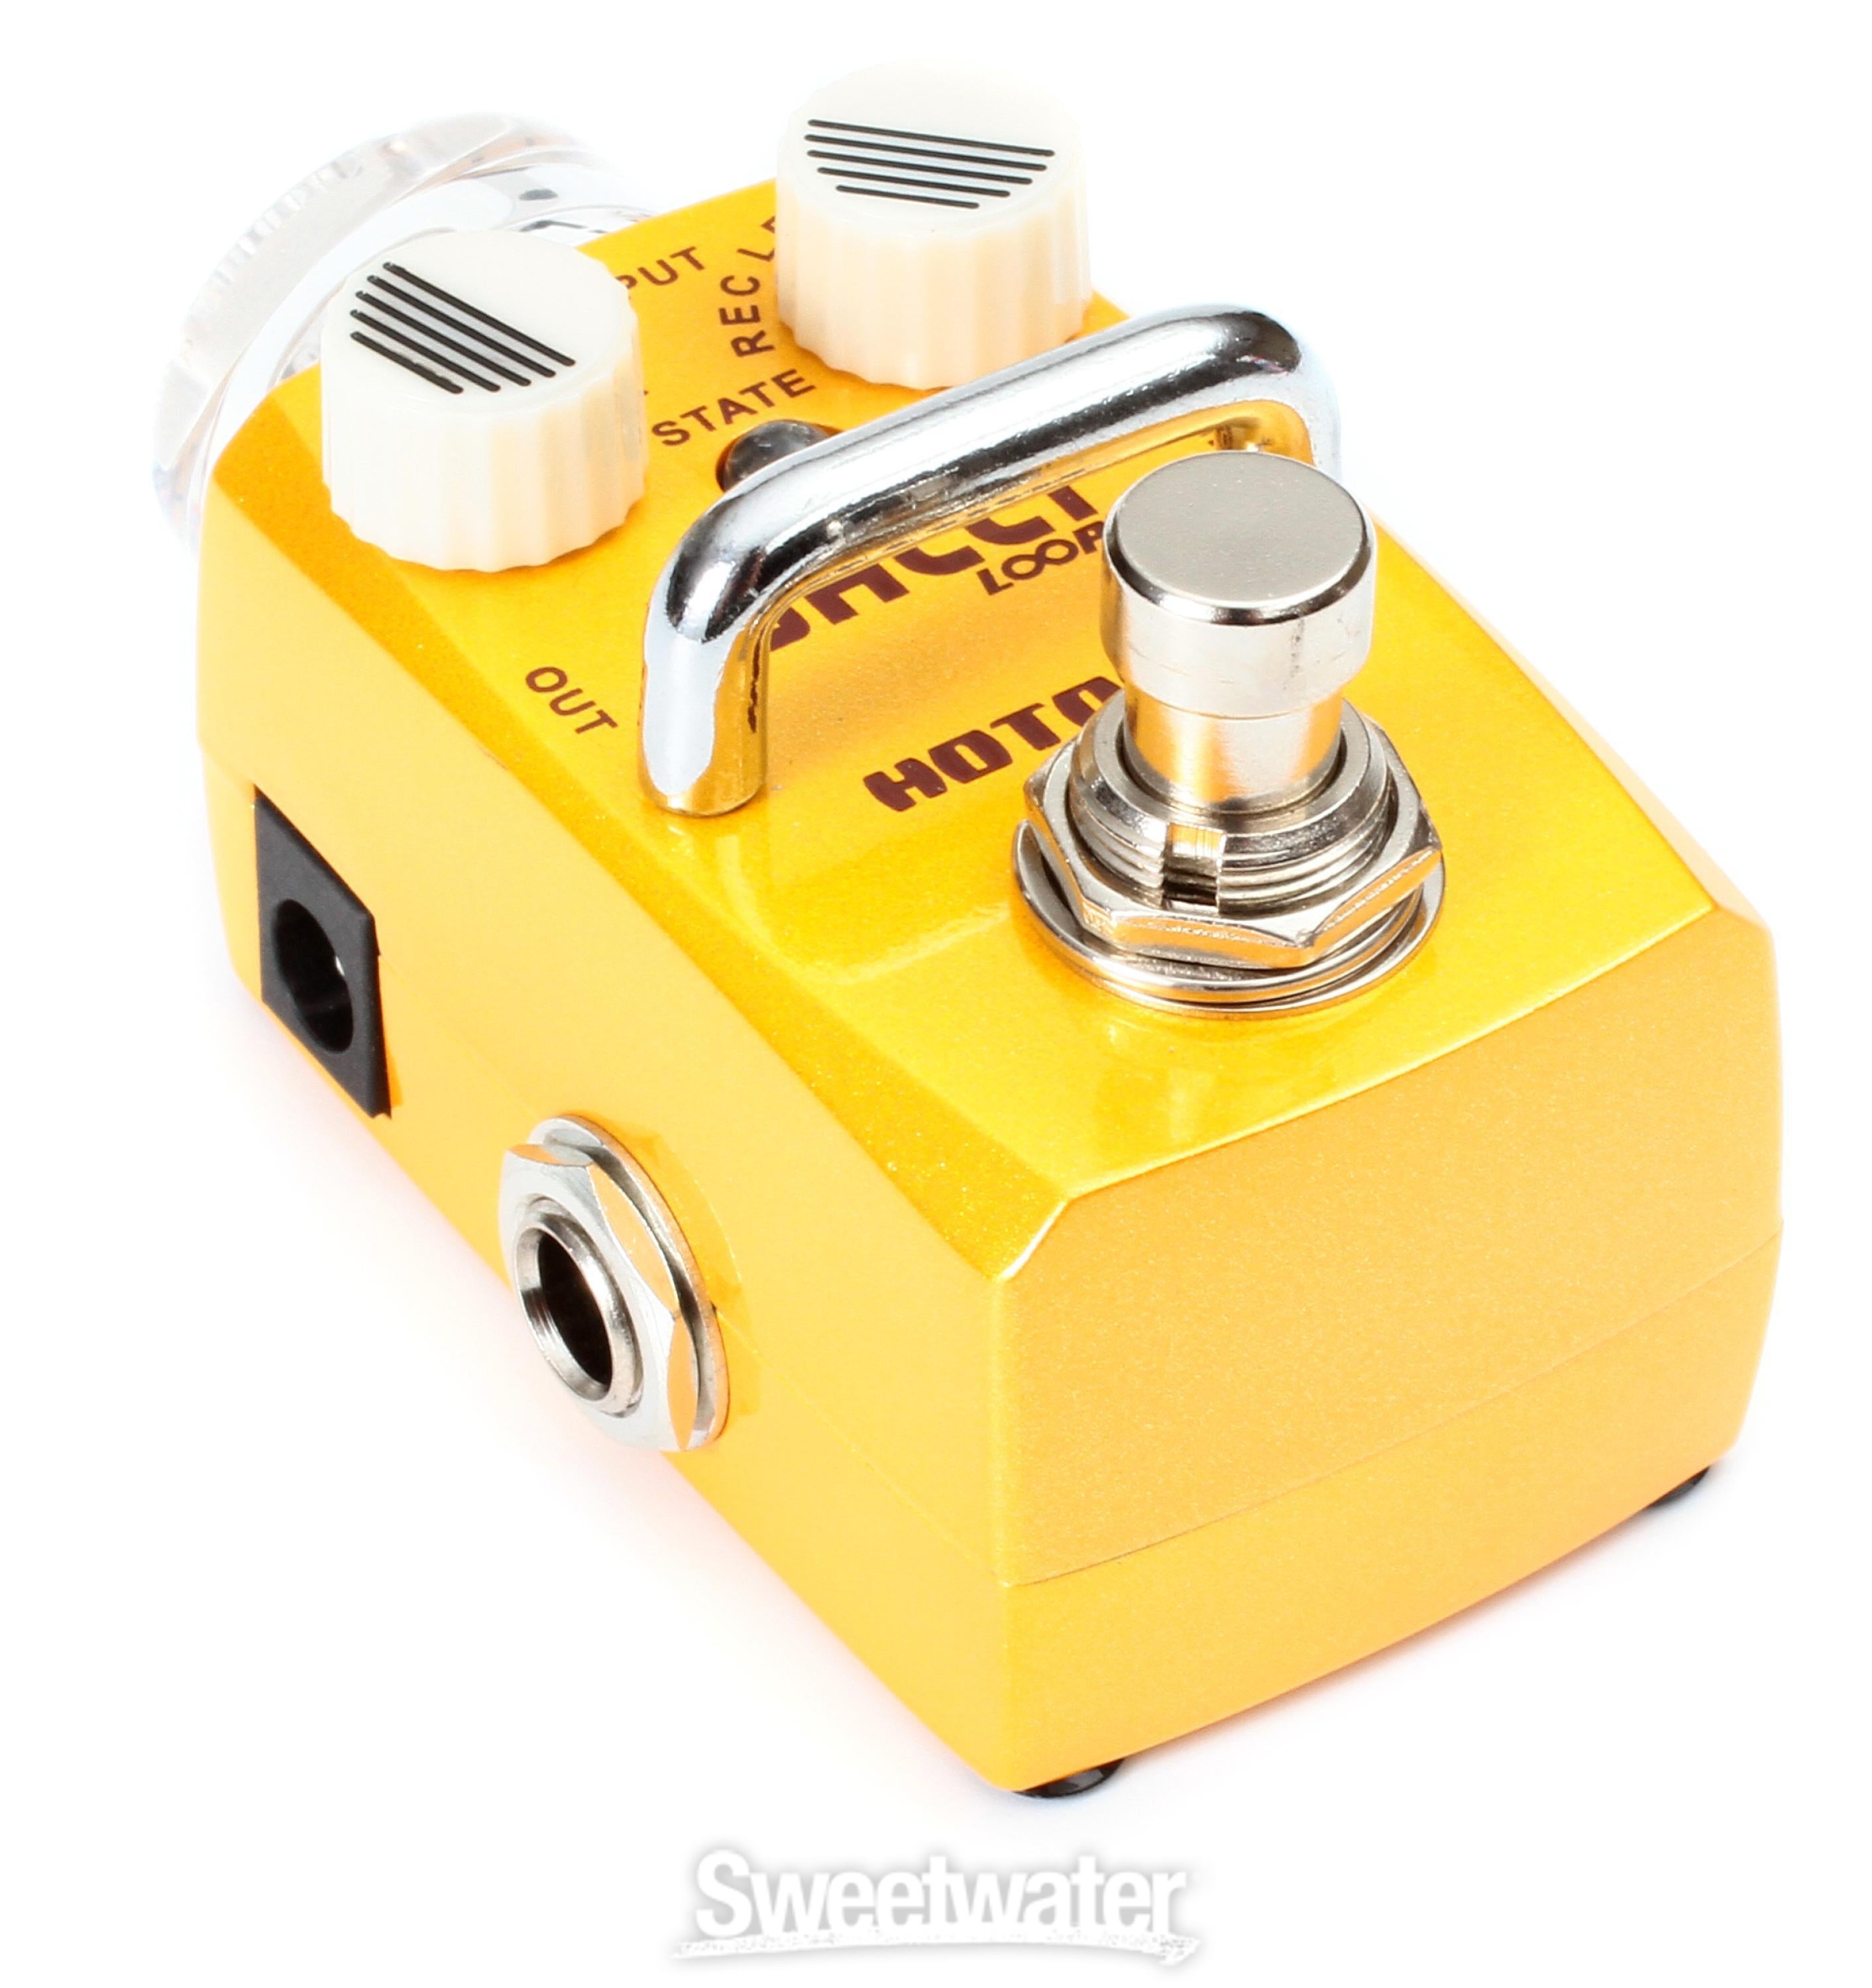 Hotone Skyline Wally Loop Station Pedal Reviews | Sweetwater